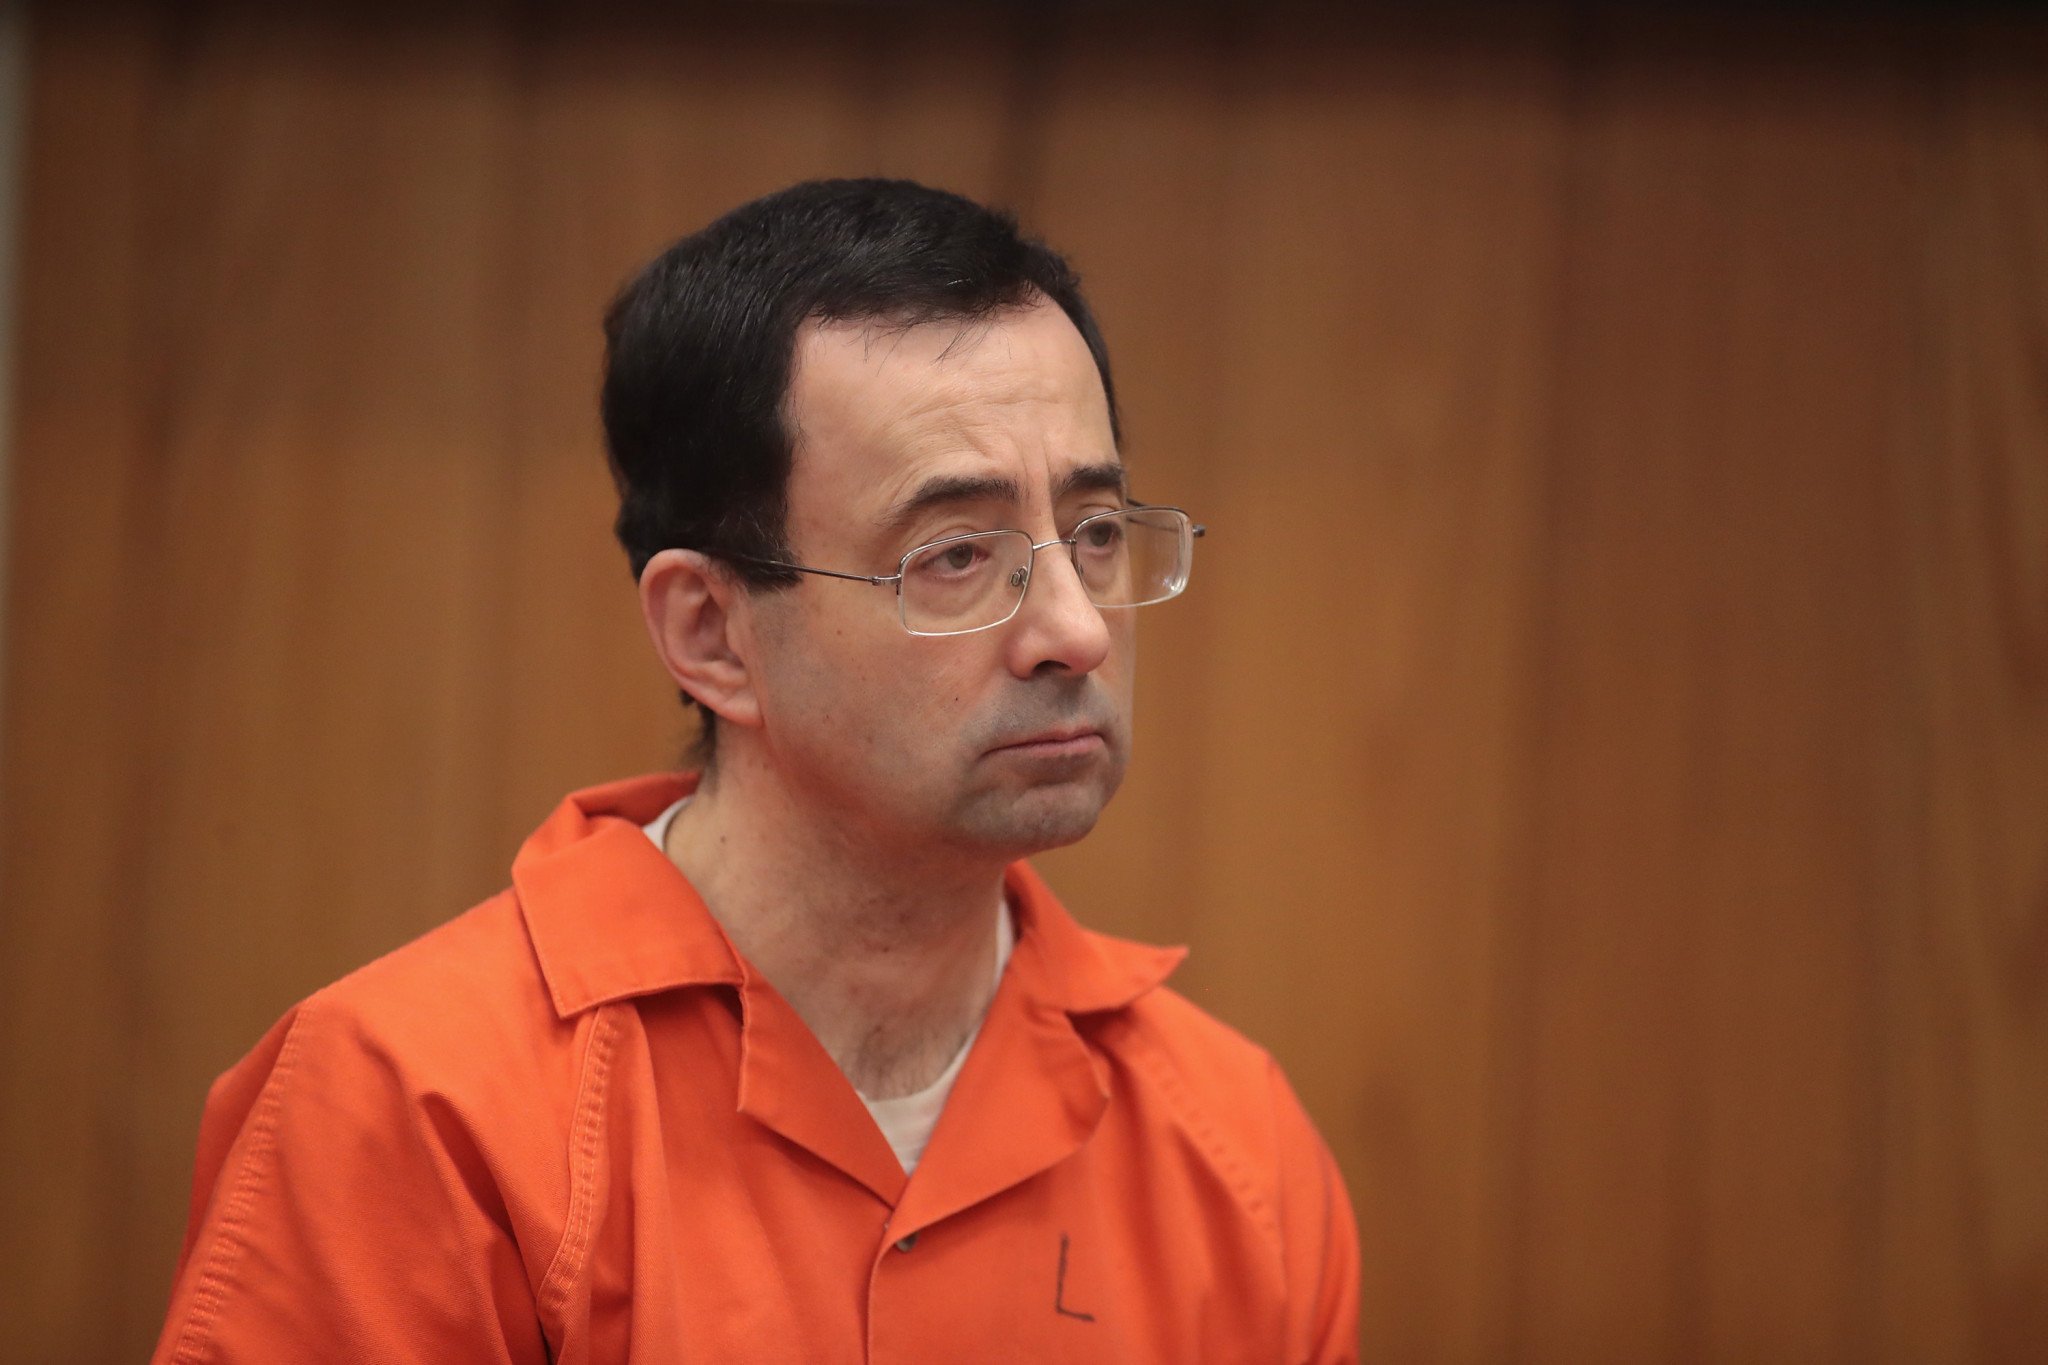 Larry Nassar was recently sentenced to 300 years in prison for sexual abuse ©Getty Images